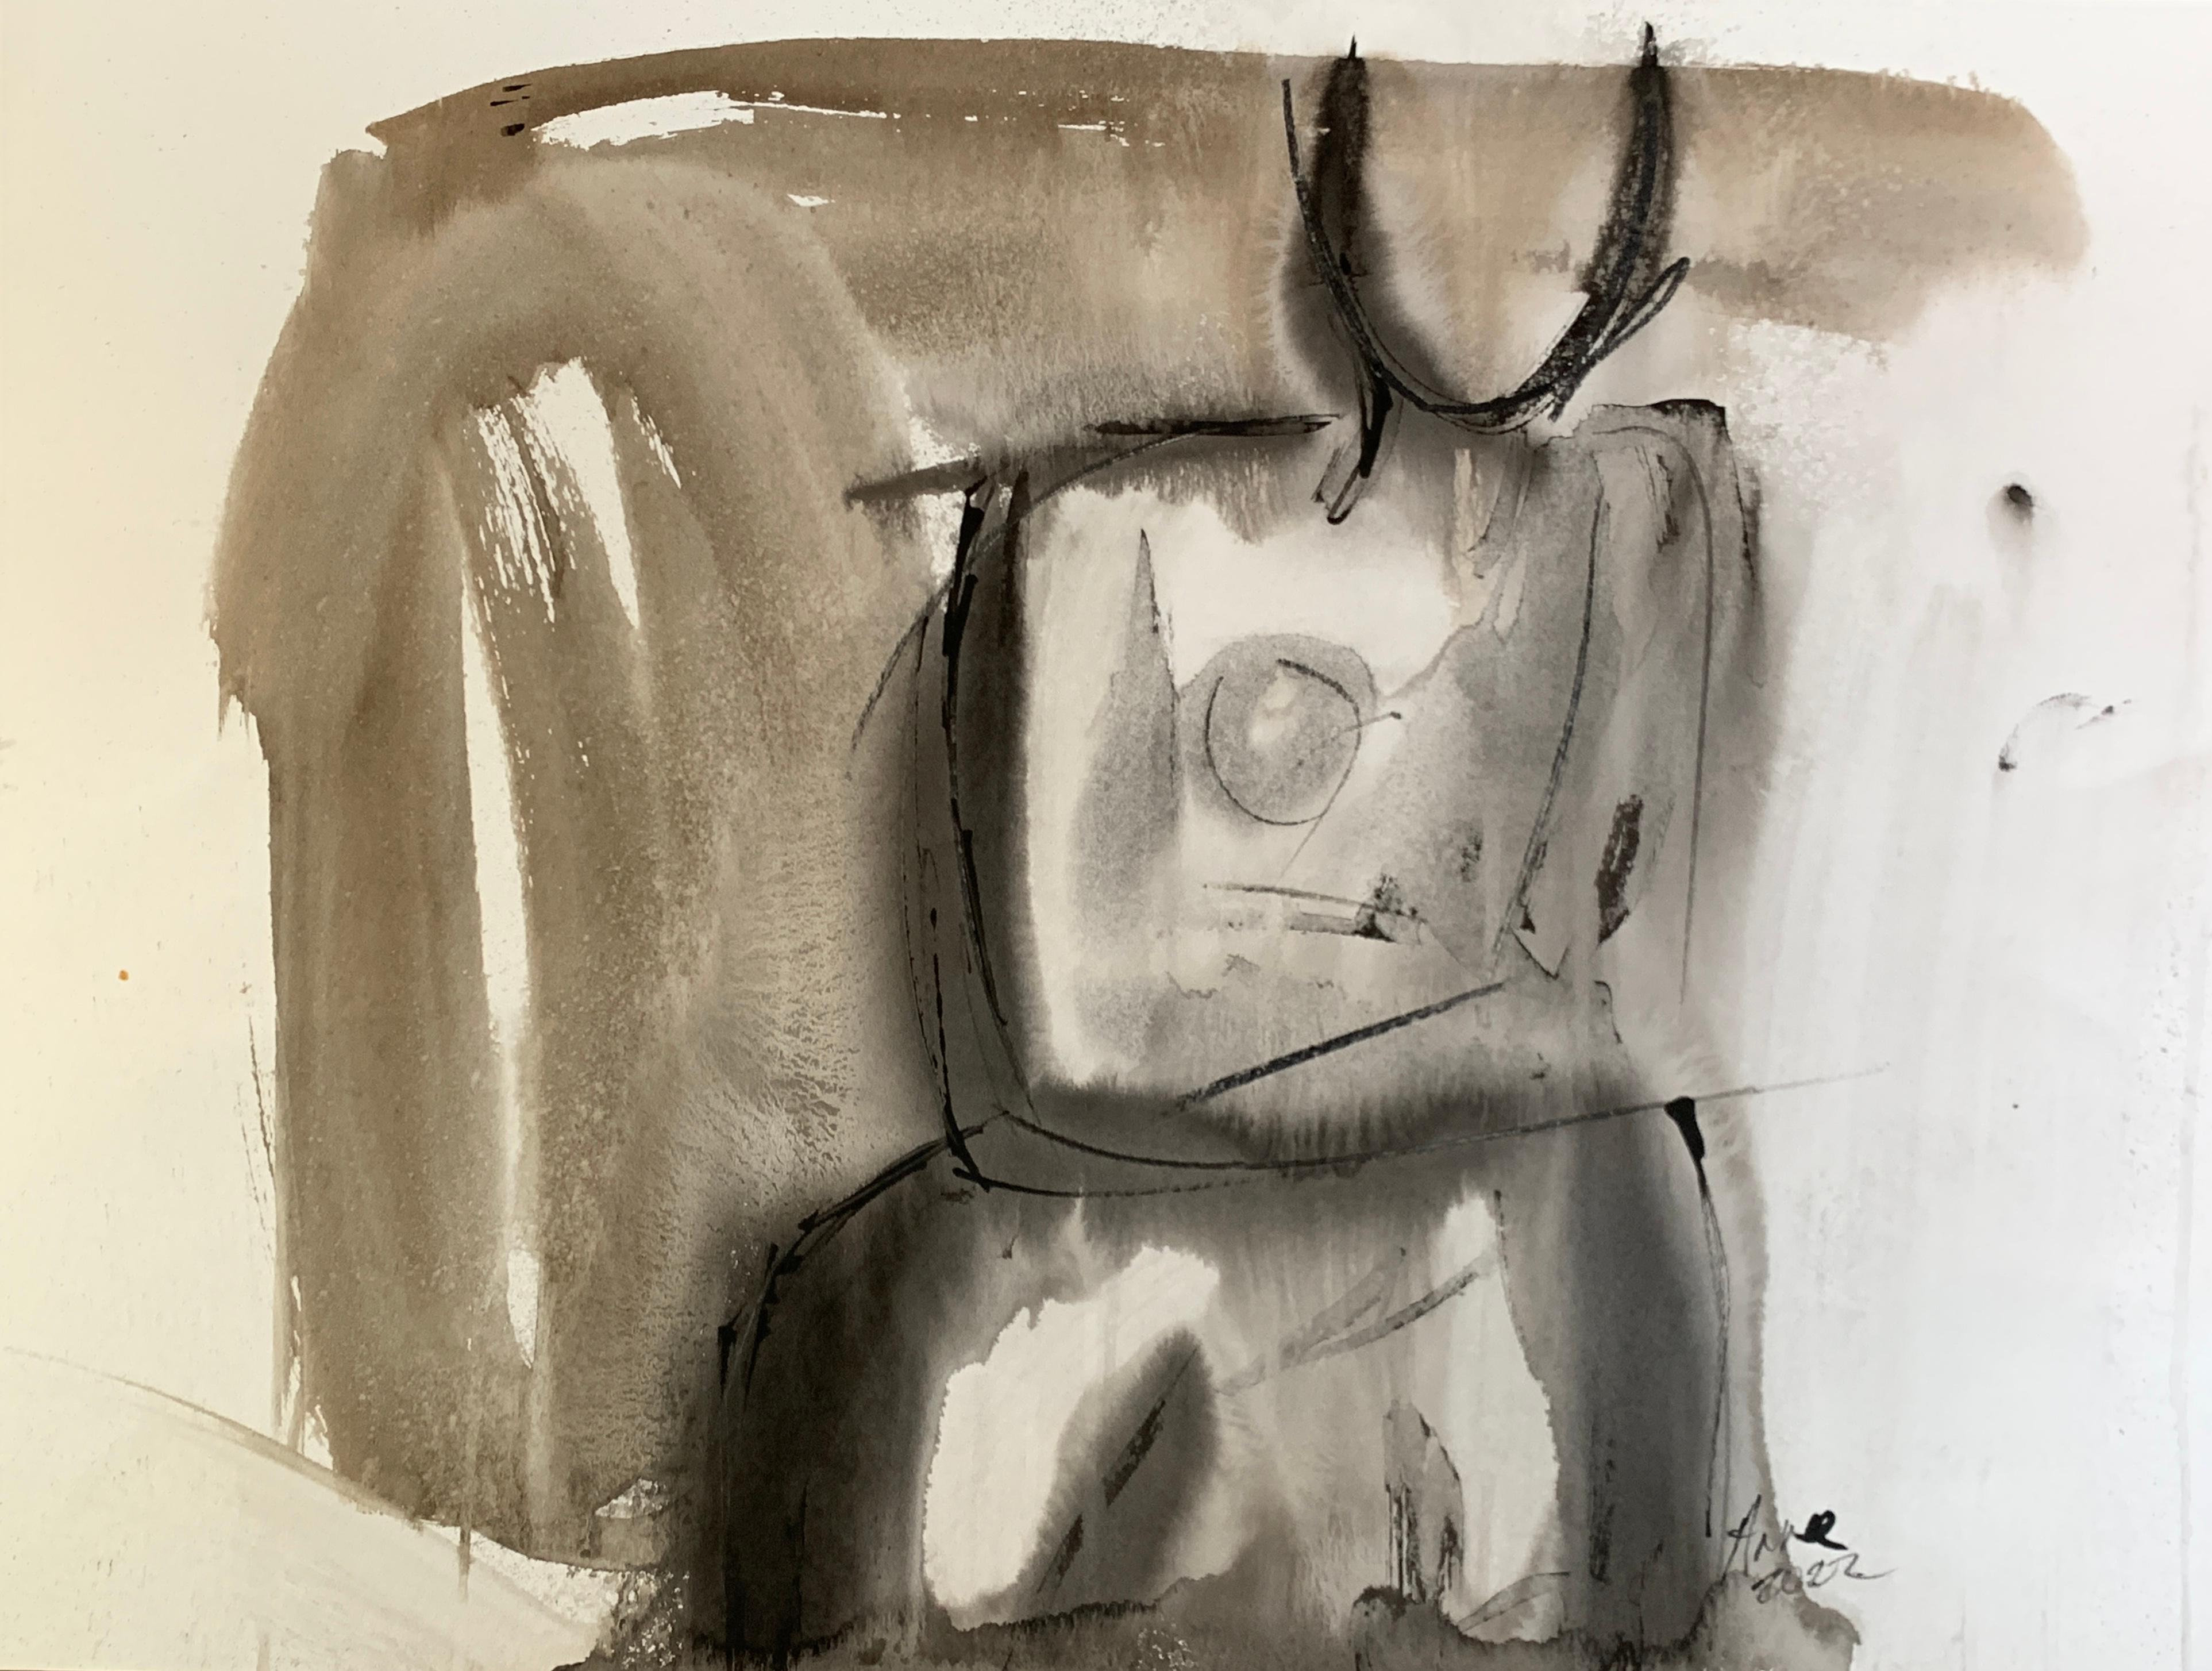 Walnut Ink and Figure by Anne Darby Parker, Contemporary Figure ink on paper